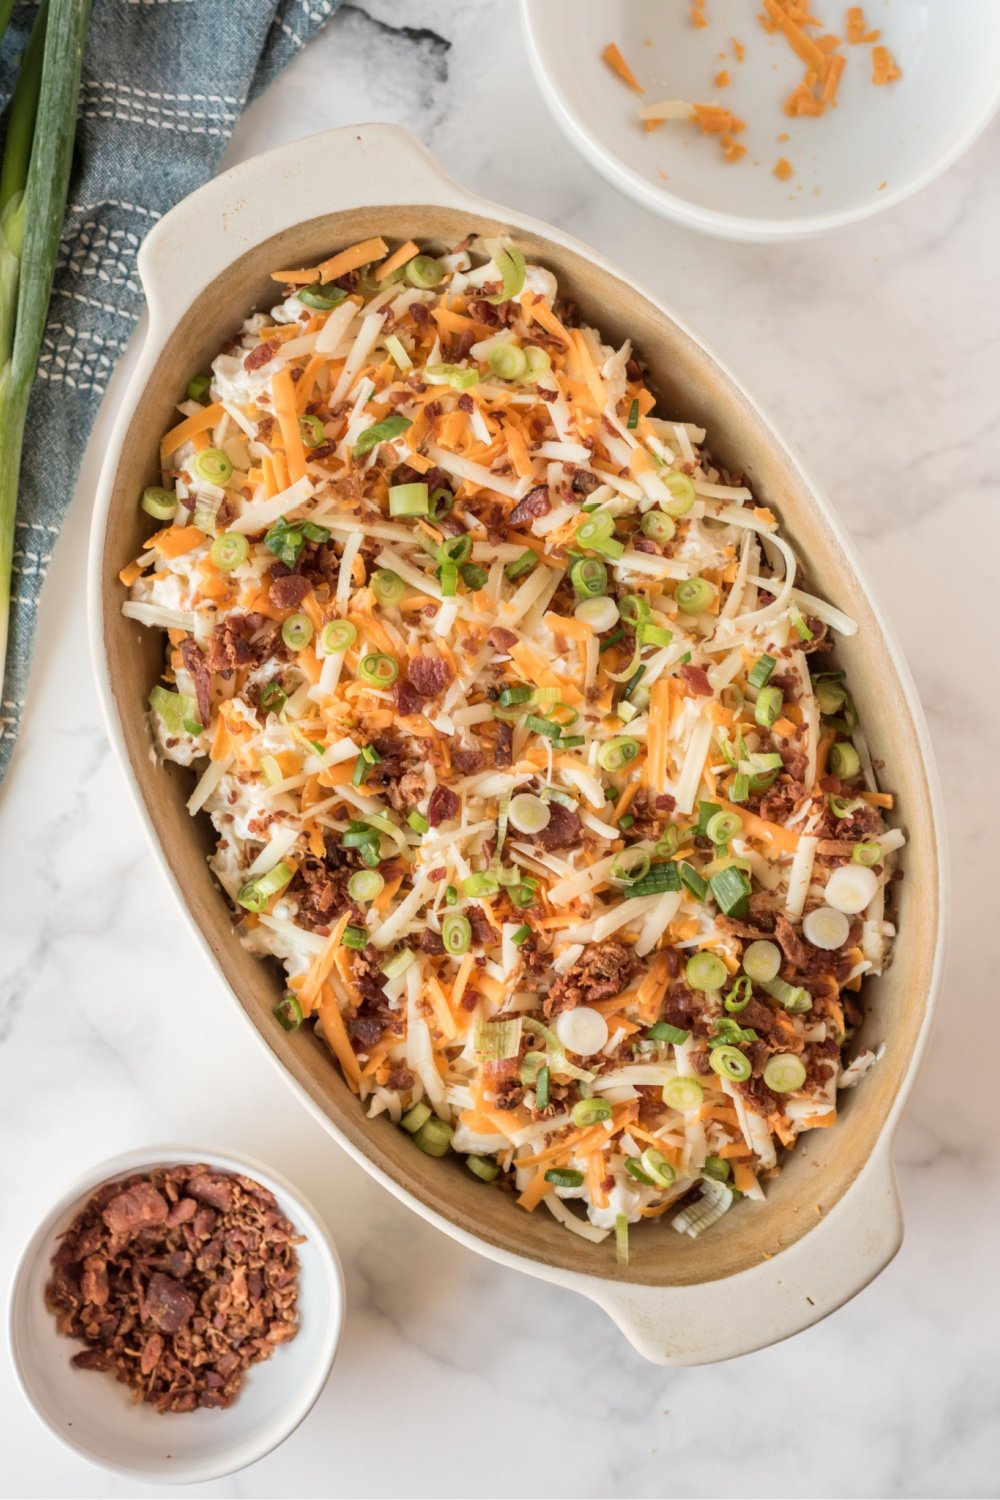 cauliflower casserole topped with shredded cheese, bacon and chives